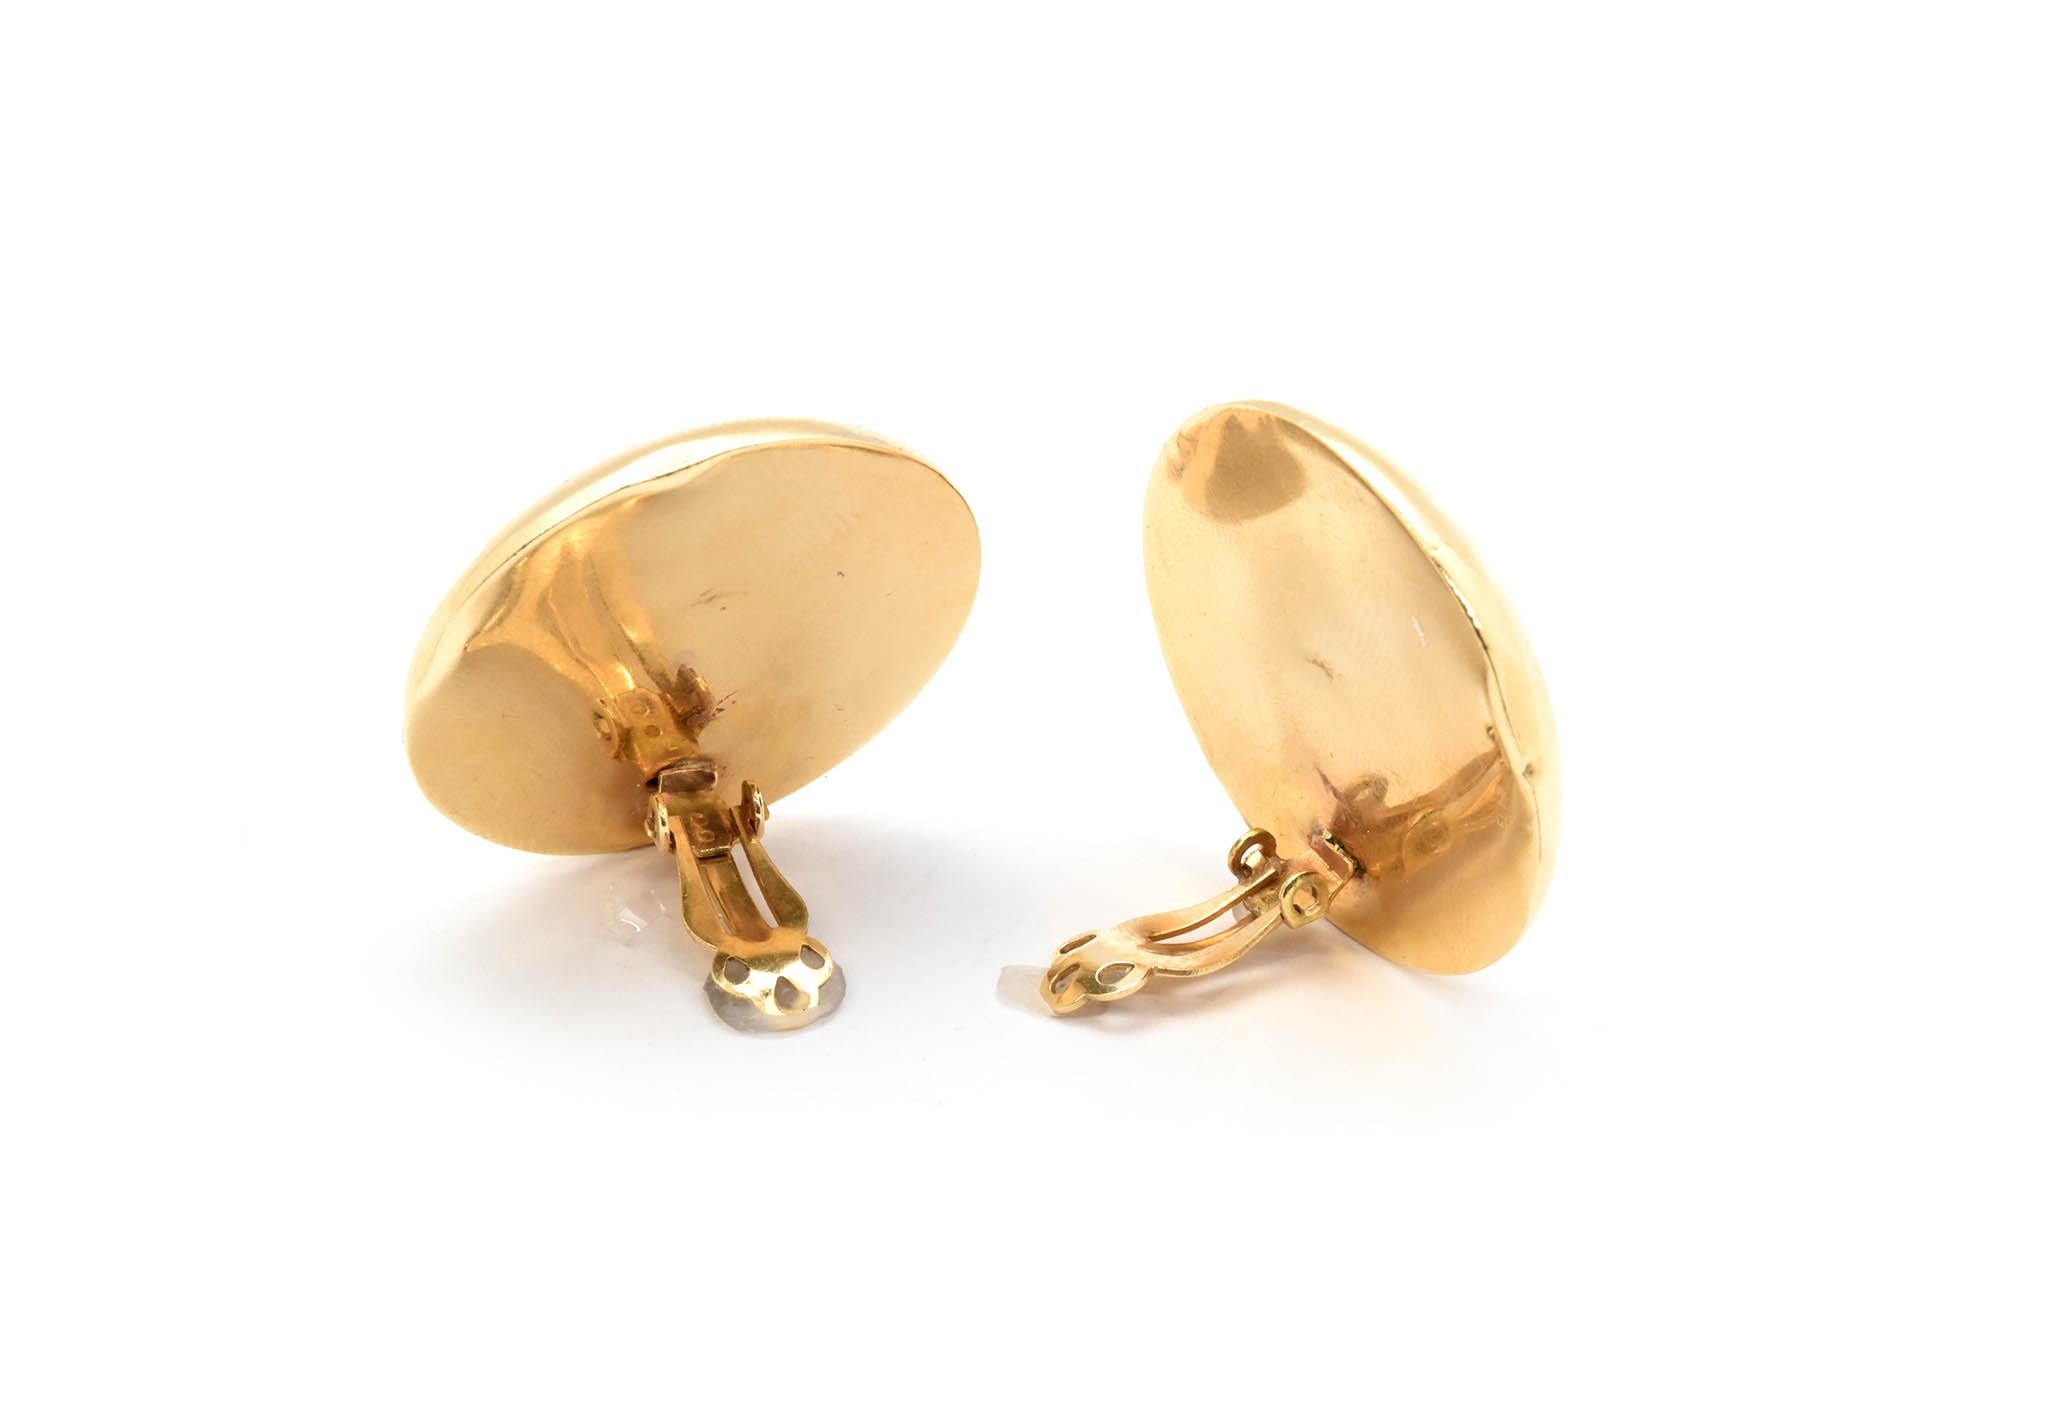 gold coin earrings for sale